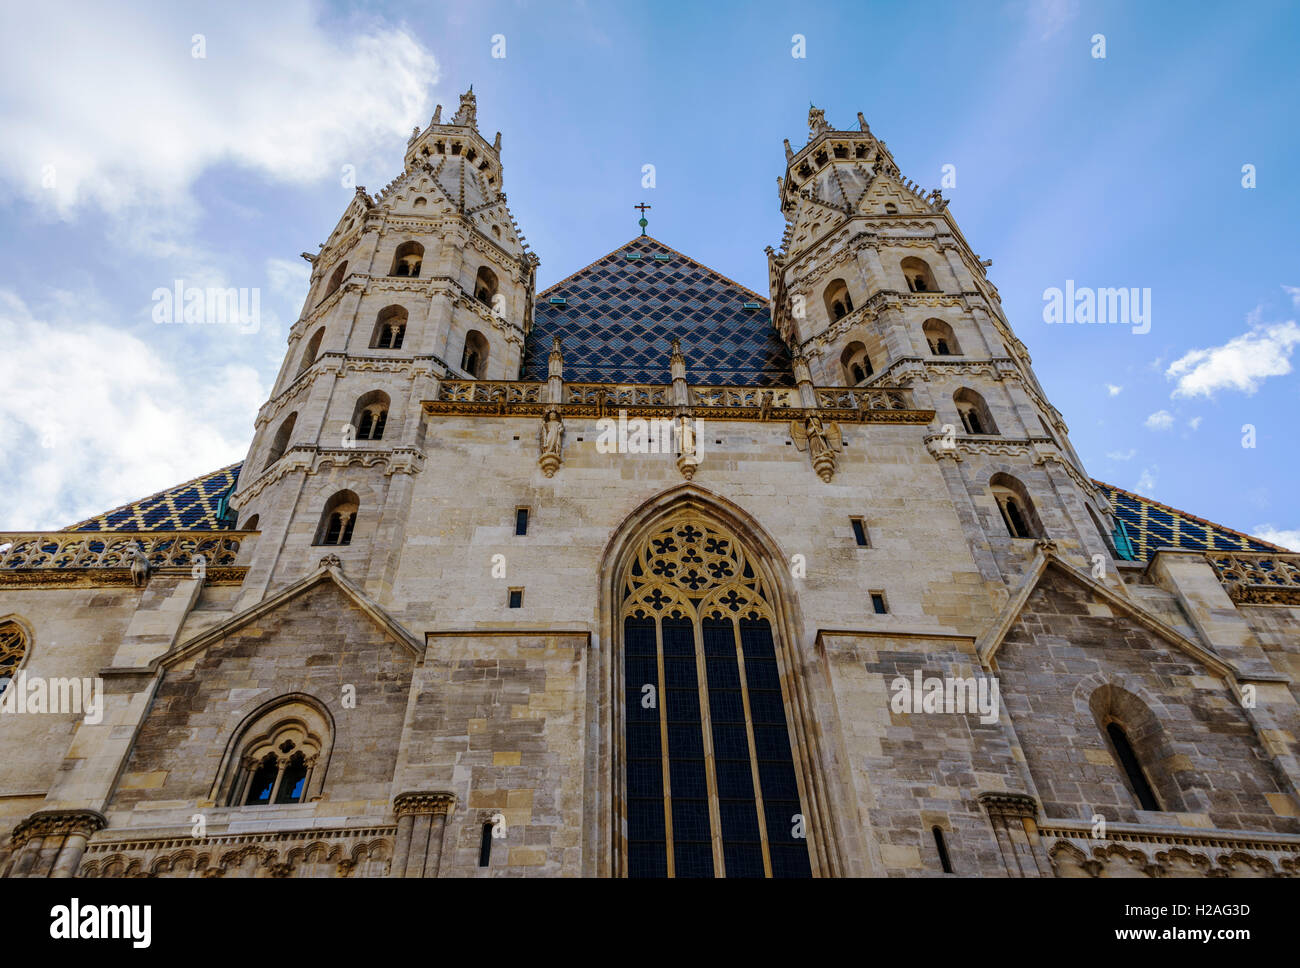 St Stephens cathedral Vienna.Catholic architecture church building. Stock Photo